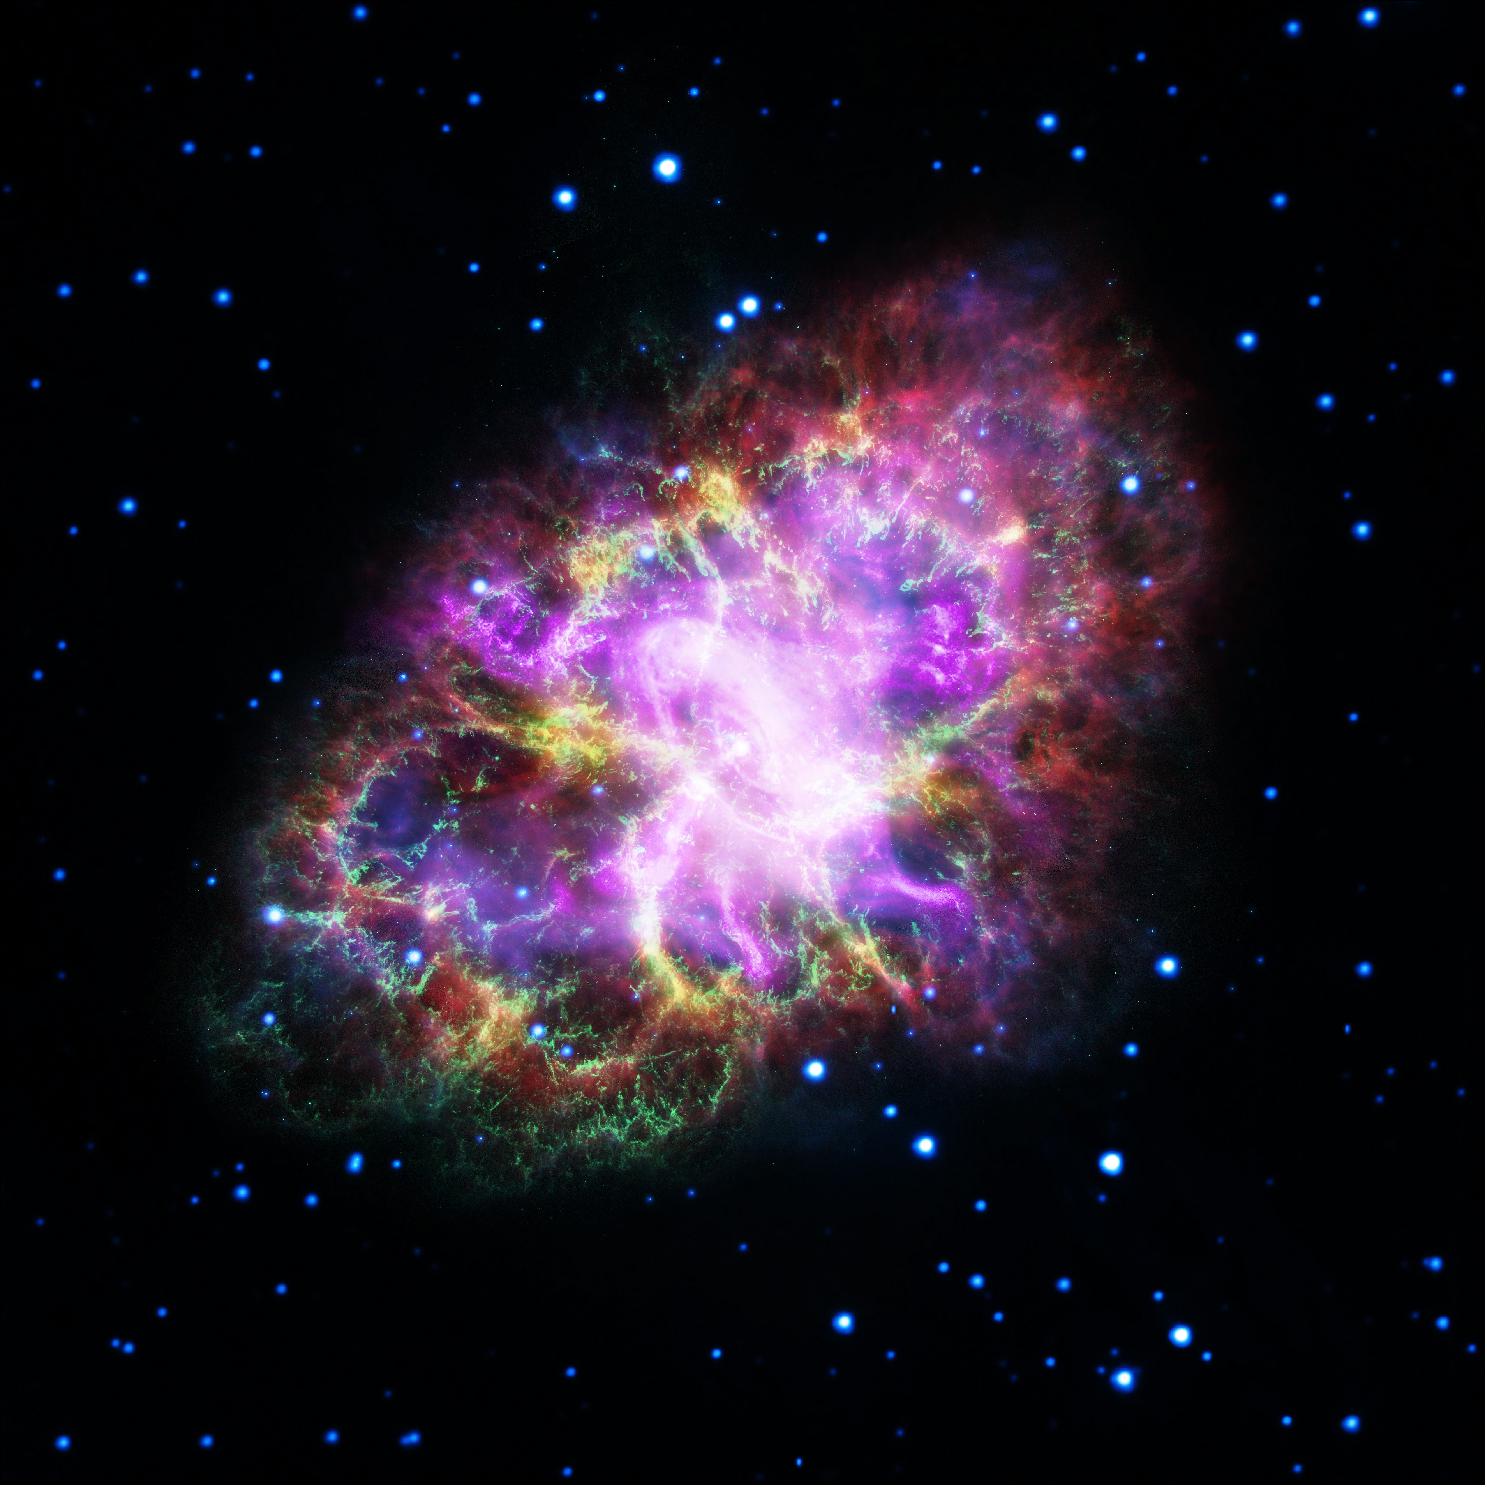 Figure 97: This image combines data from five different telescopes: The VLA (radio) in red; Spitzer Space Telescope (infrared) in yellow; Hubble Space Telescope (visible) in green; XMM-Newton (ultraviolet) in blue; and Chandra X-Ray Observatory (X-ray) in purple (image credit: G. Dubner (IAFE, CONICET-University of Buenos Aires) et al.; NRAO/AUI/NSF; A. Loll et al.; T. Temim et al.; F. Seward et al.; Chandra/CXC; Spitzer/JPL-Caltech; XMM-Newton/ESA; and Hubble/STScI)